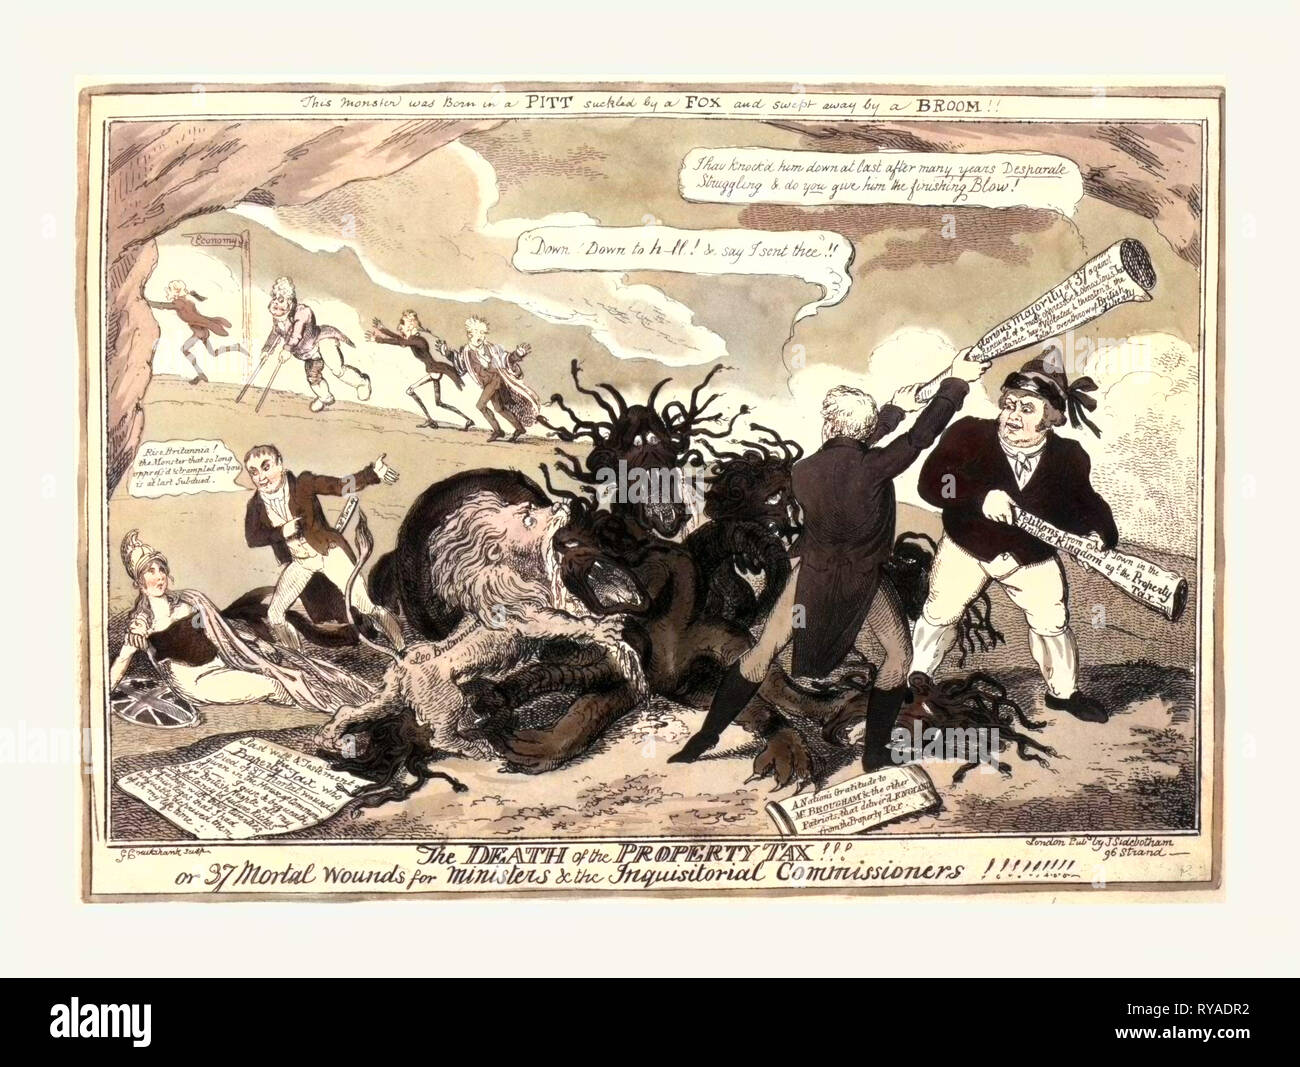 The Death of the Property Tax! or 37 Mortal Wounds for Ministers & the Inquisitoral Commissioners!, Cruikshank, George, 1792-1878, Engraving 1816, Henry Brougham, John Bull, and the British Lion (Leo Britannicus) Attacking a Hydra Representing the Property Tax. At Tail of the Monster Mr. Tierney Tells Britannia to Rise. In the Background, Liverpool, the Regent, Castlereagh, and Vansittart Hasten Up a Slope with a Sign-Post Pointing to Economy Stock Photo